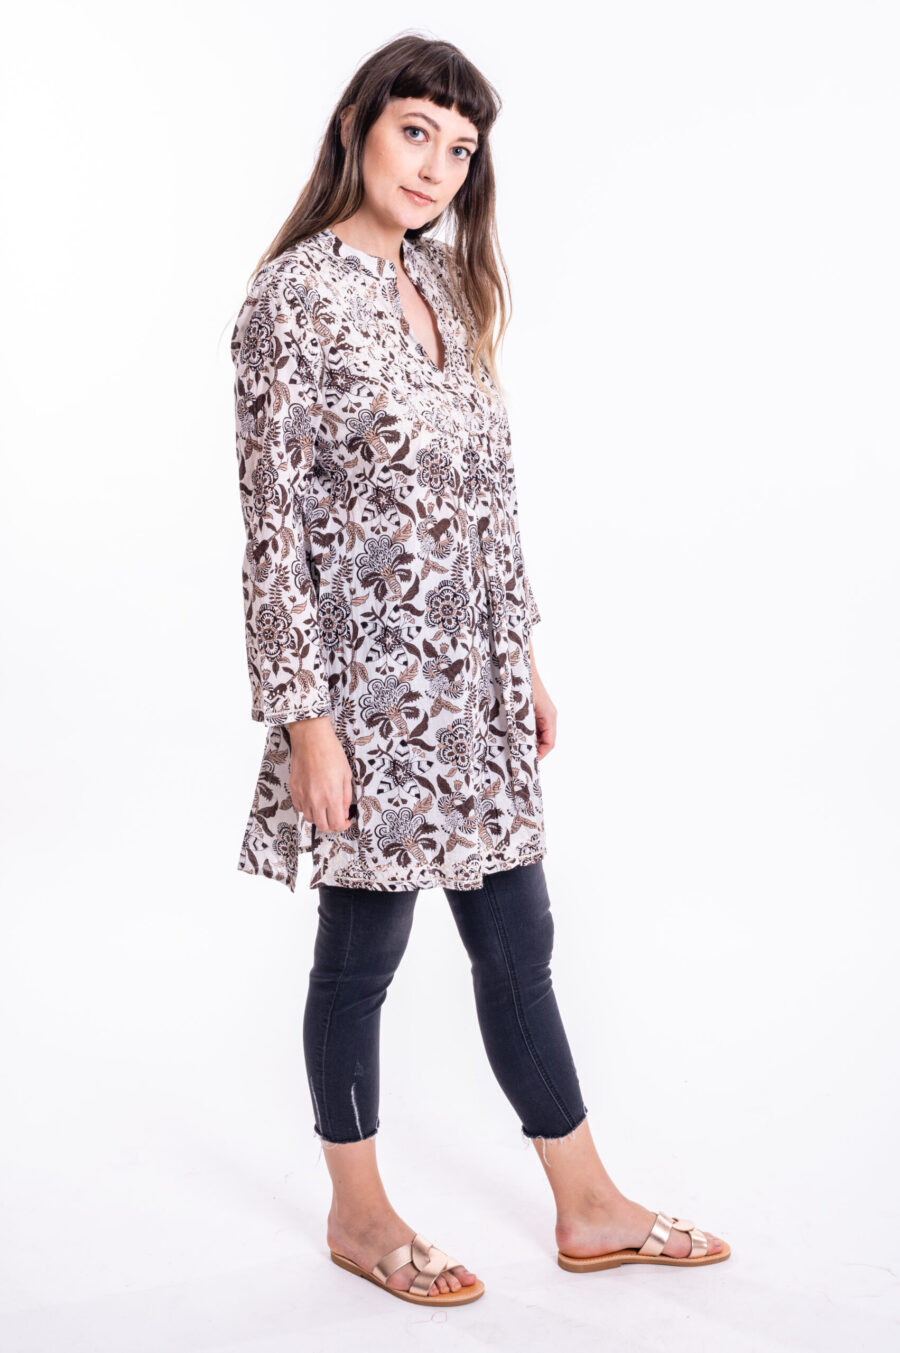 Embroidered tunic | Short embroidered dress for women - Uniquely designed tunic - white with brown floral print